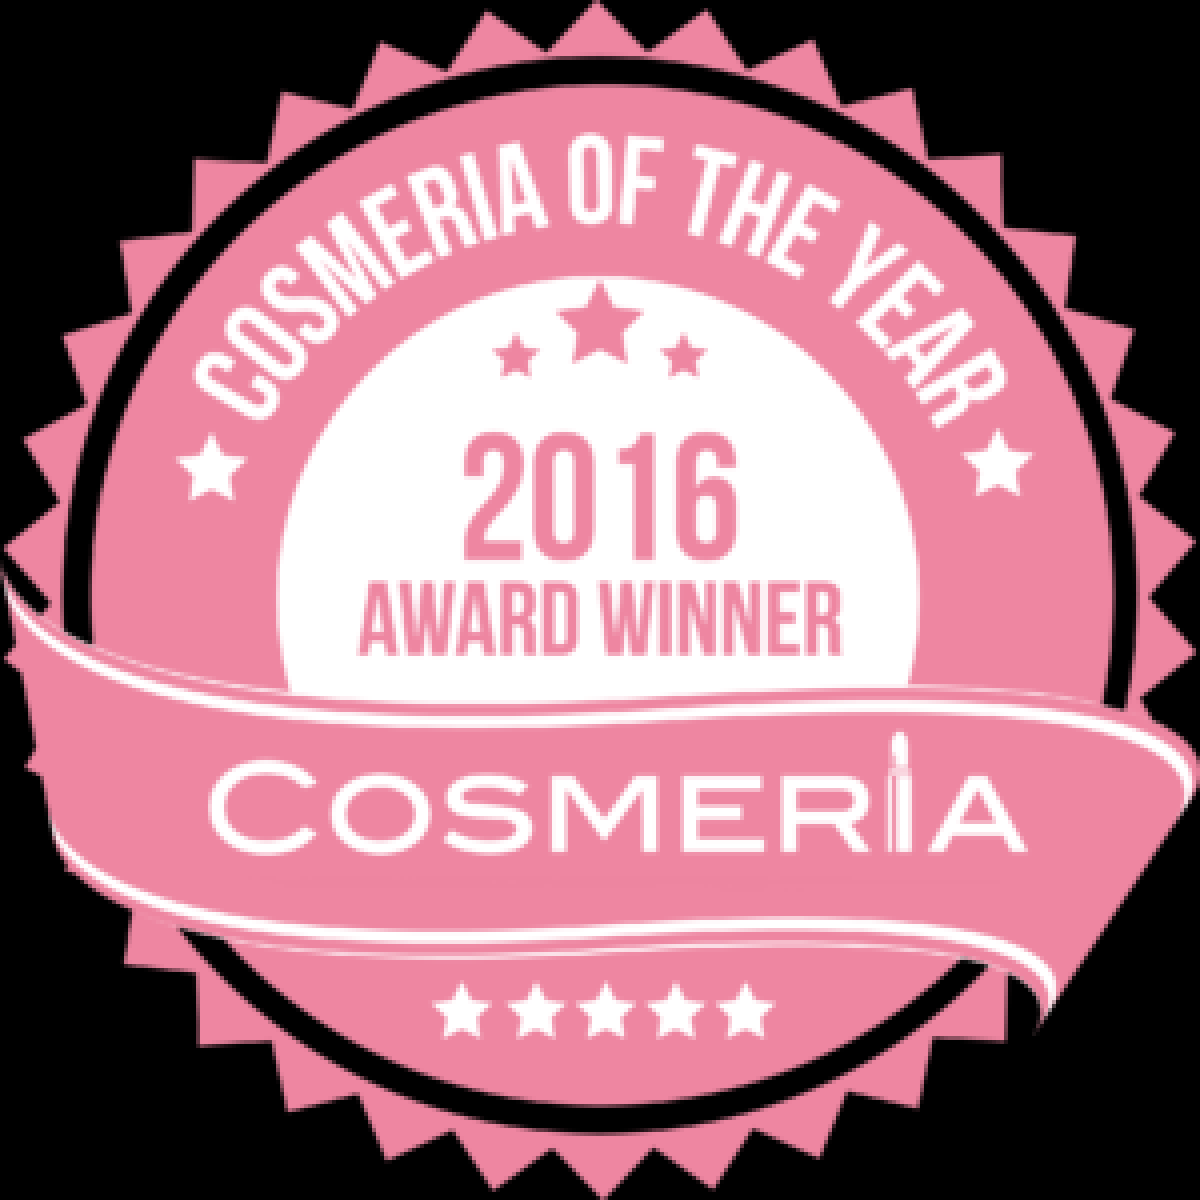 COSMERIA of the Year 2016 – 10万人のアジア女性が選んだ日本の化粧品大賞 発表！